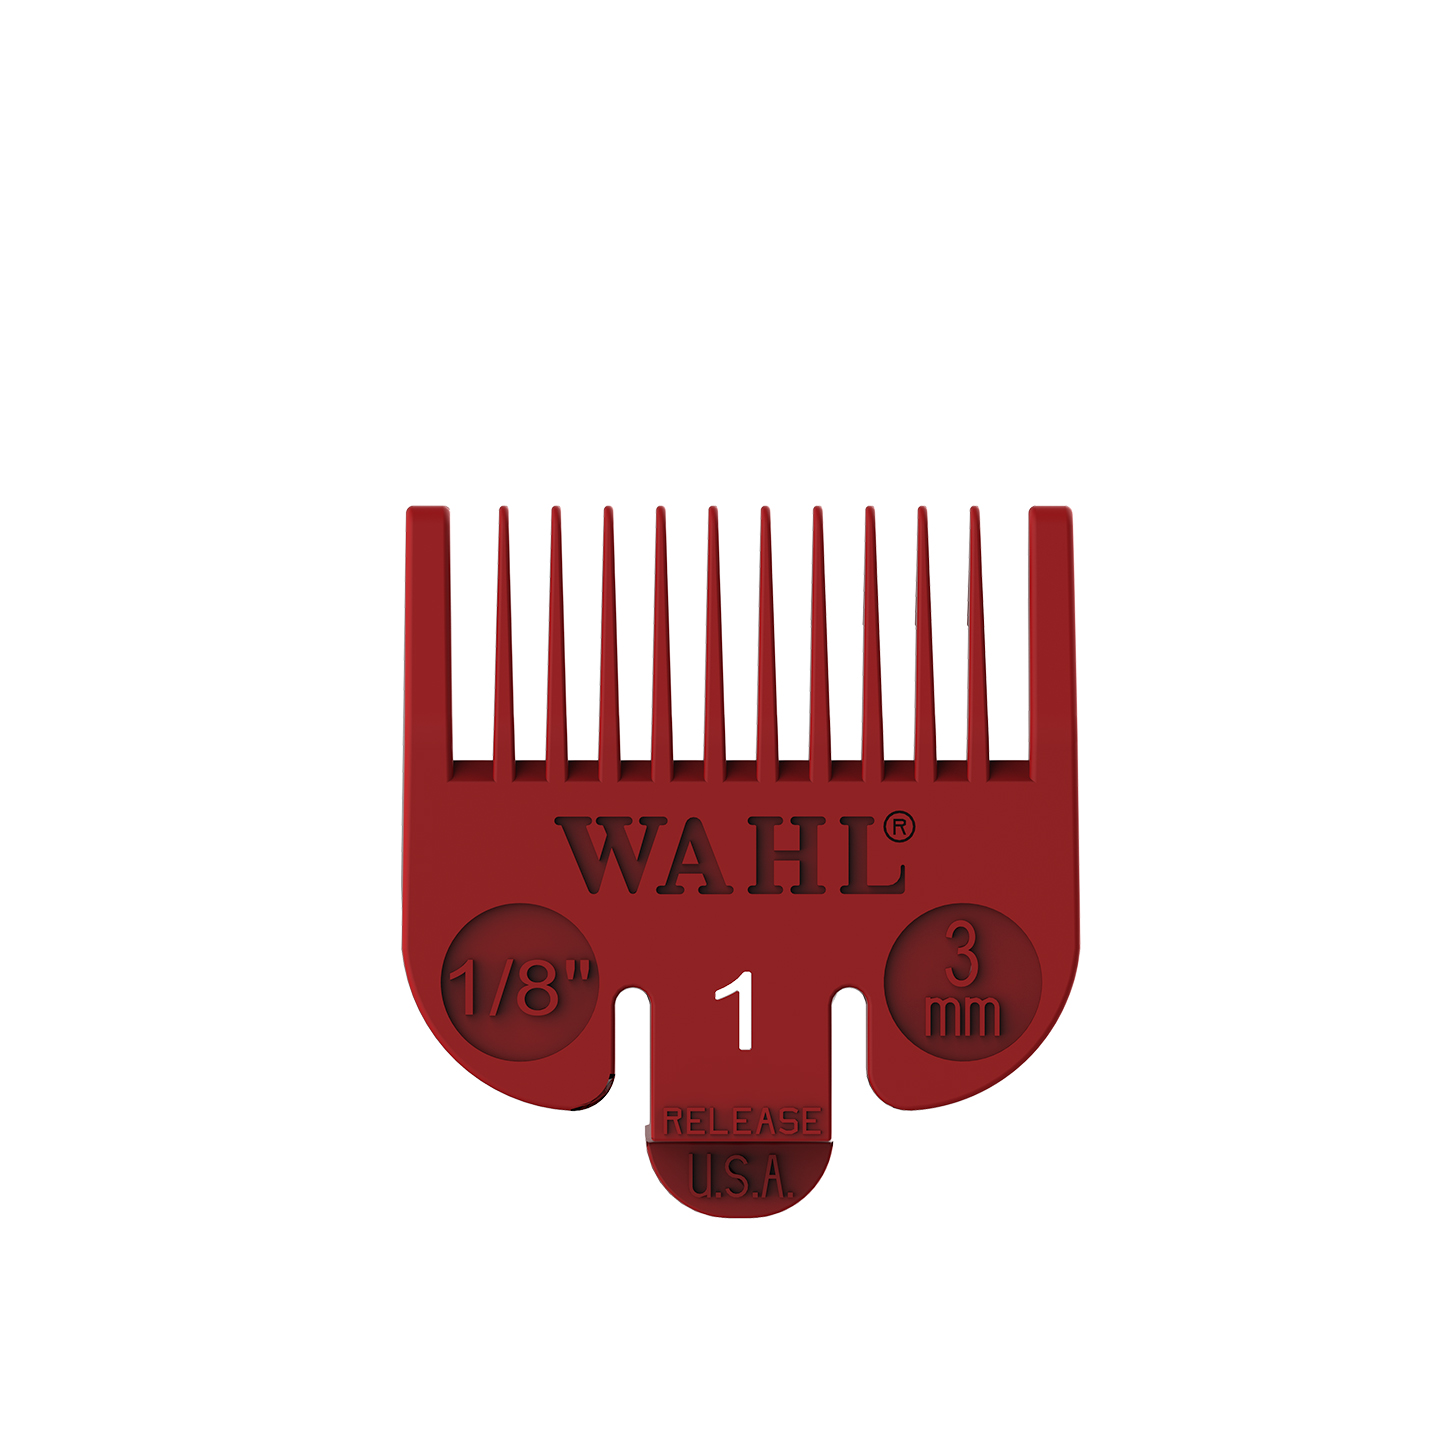 comb sizes for clippers